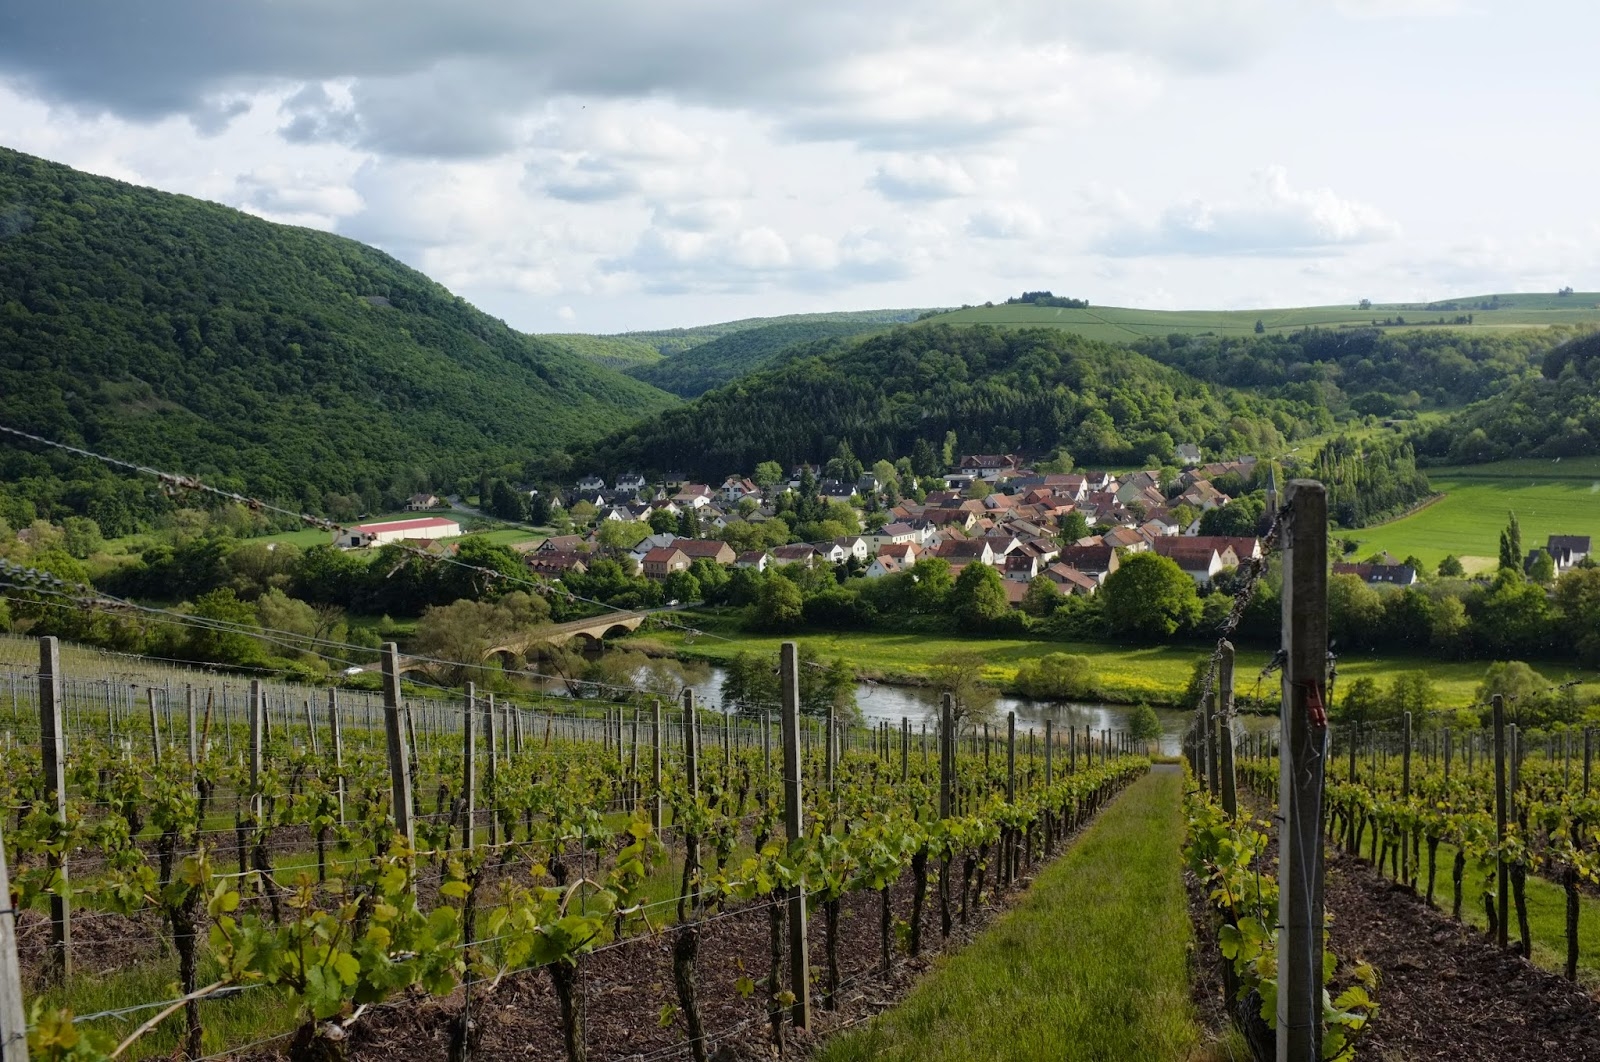 View over a vineyard field with houses in distance